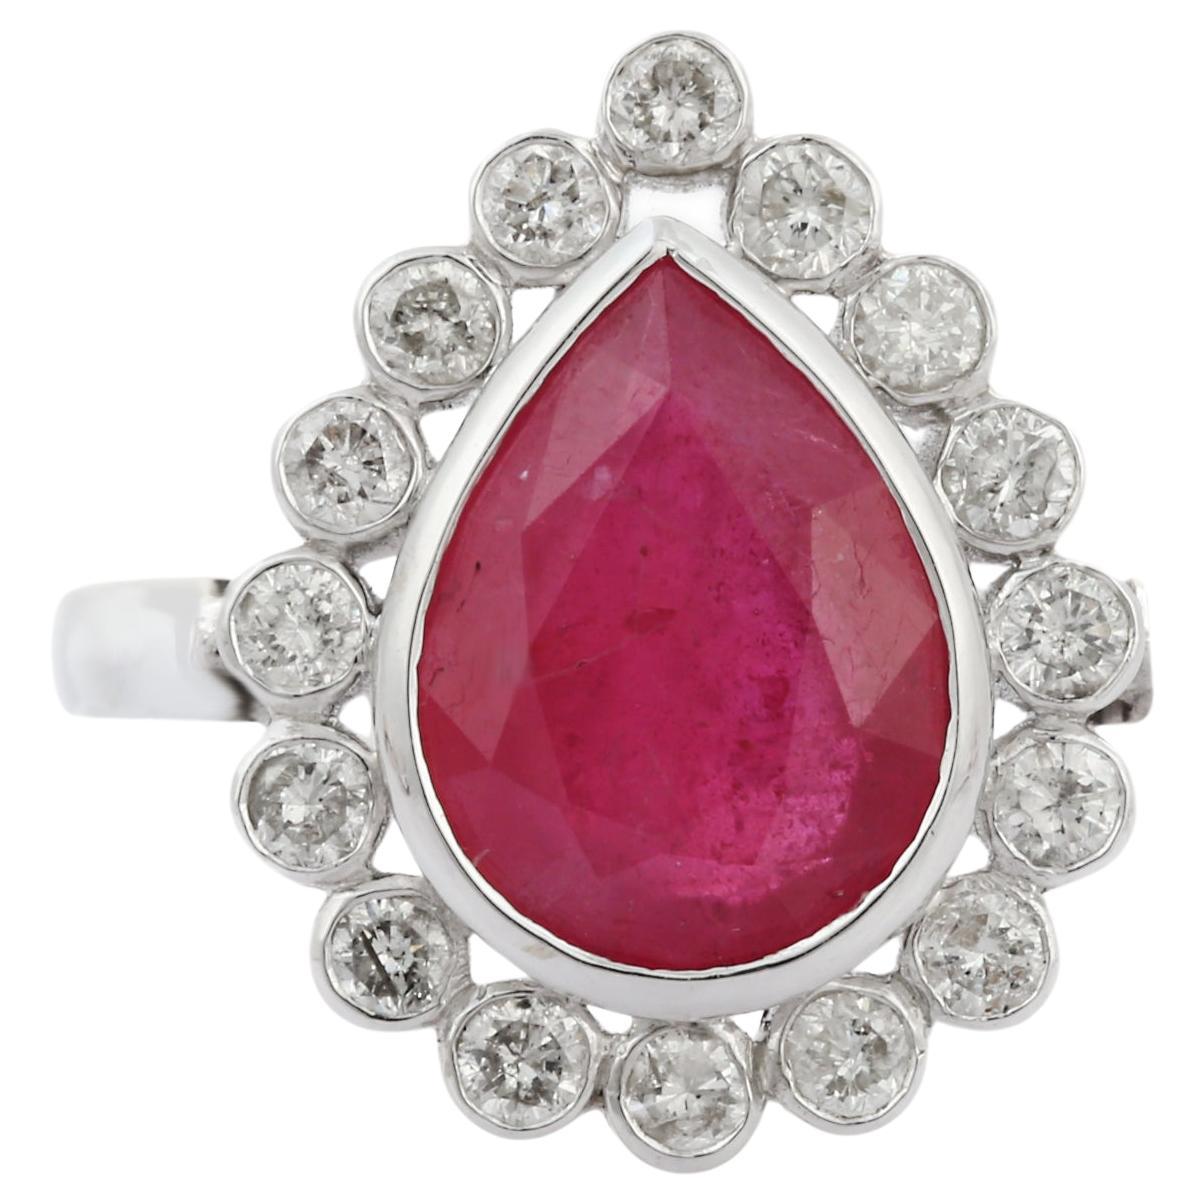 18K White Gold Pear Cut Ruby Cocktail Ring with Diamonds